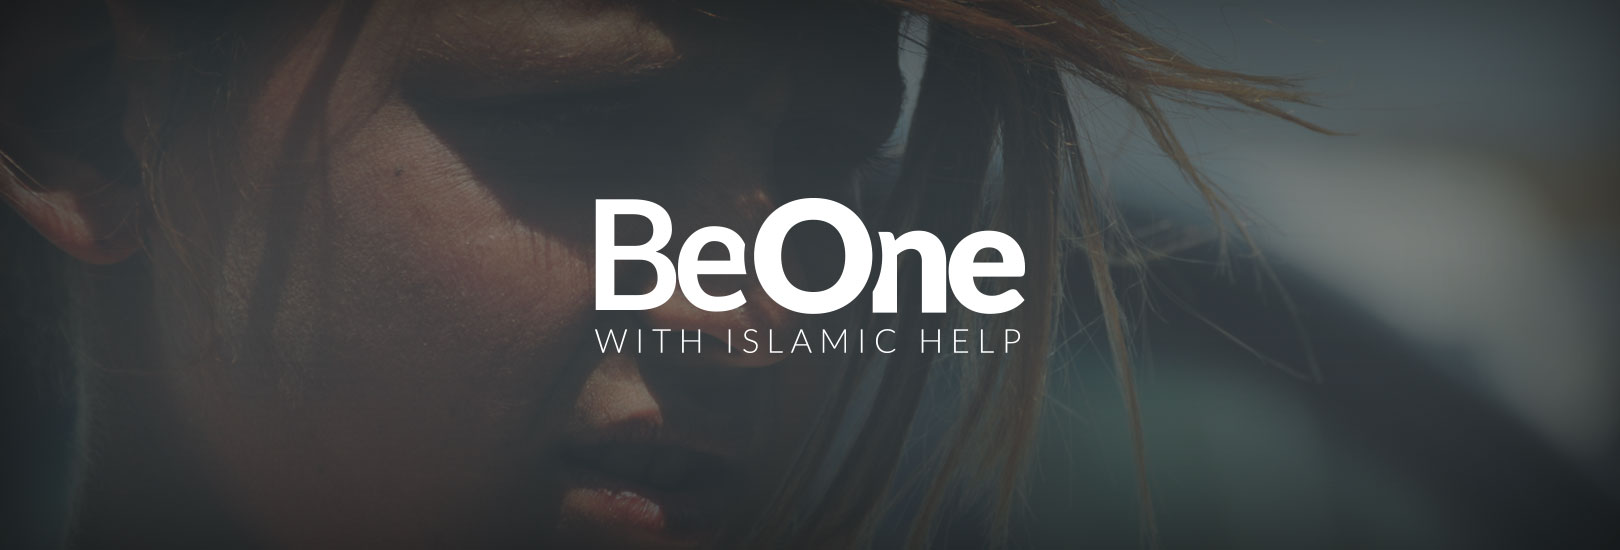 BeOne Campaign banner